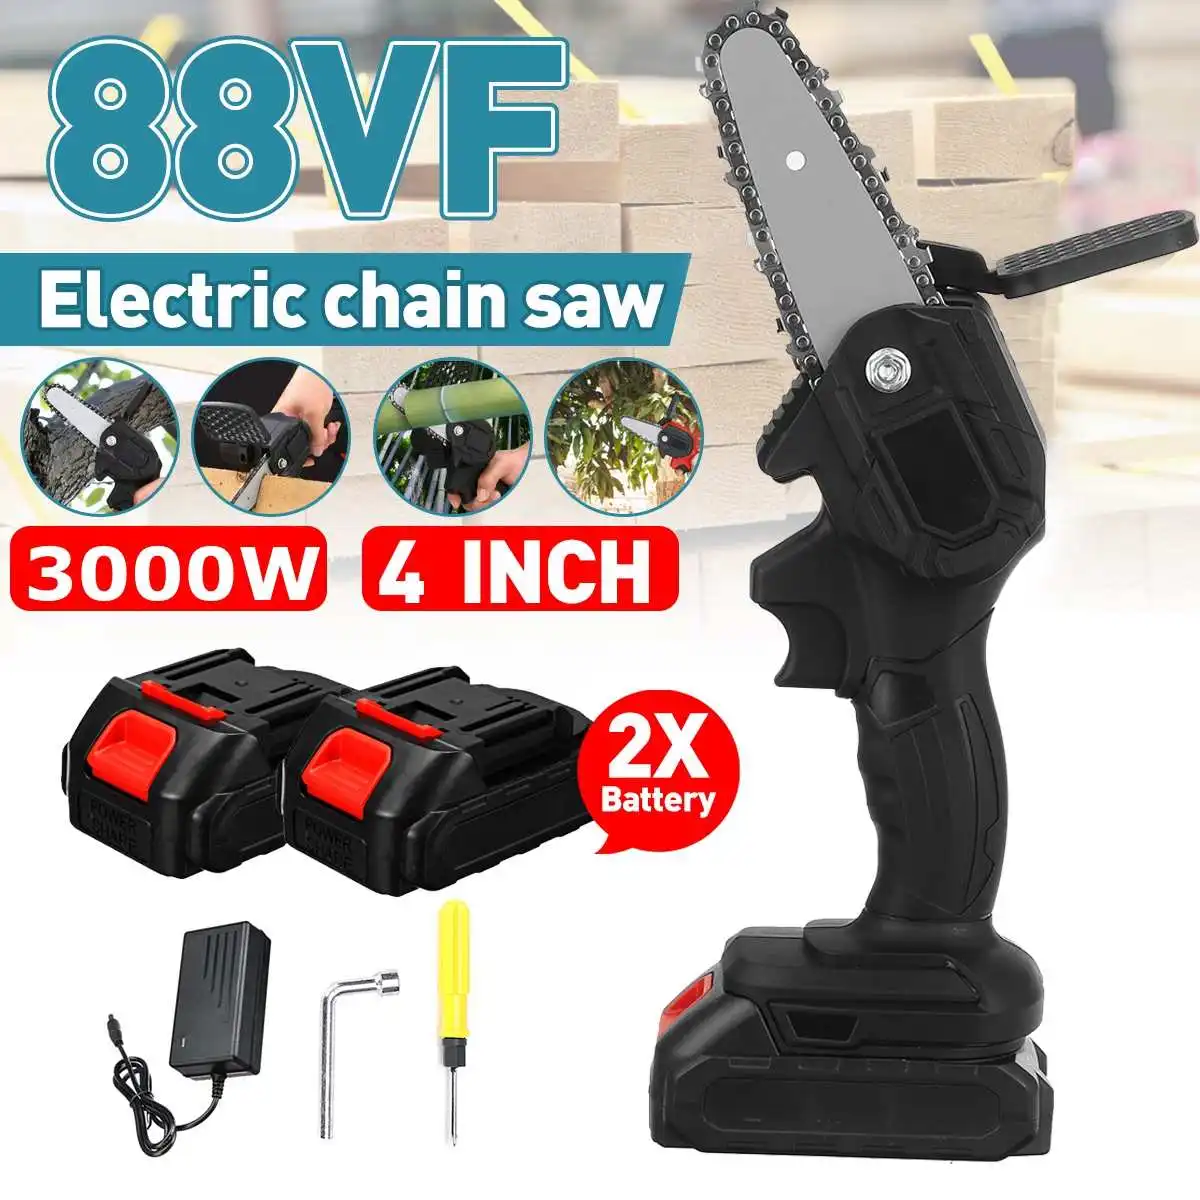 

3000W 4 inch Electric Chain Saws Wood Cutting Pruning ChainSaw Cordless Garden Tree Logging Trimming Saw for Makita Battery